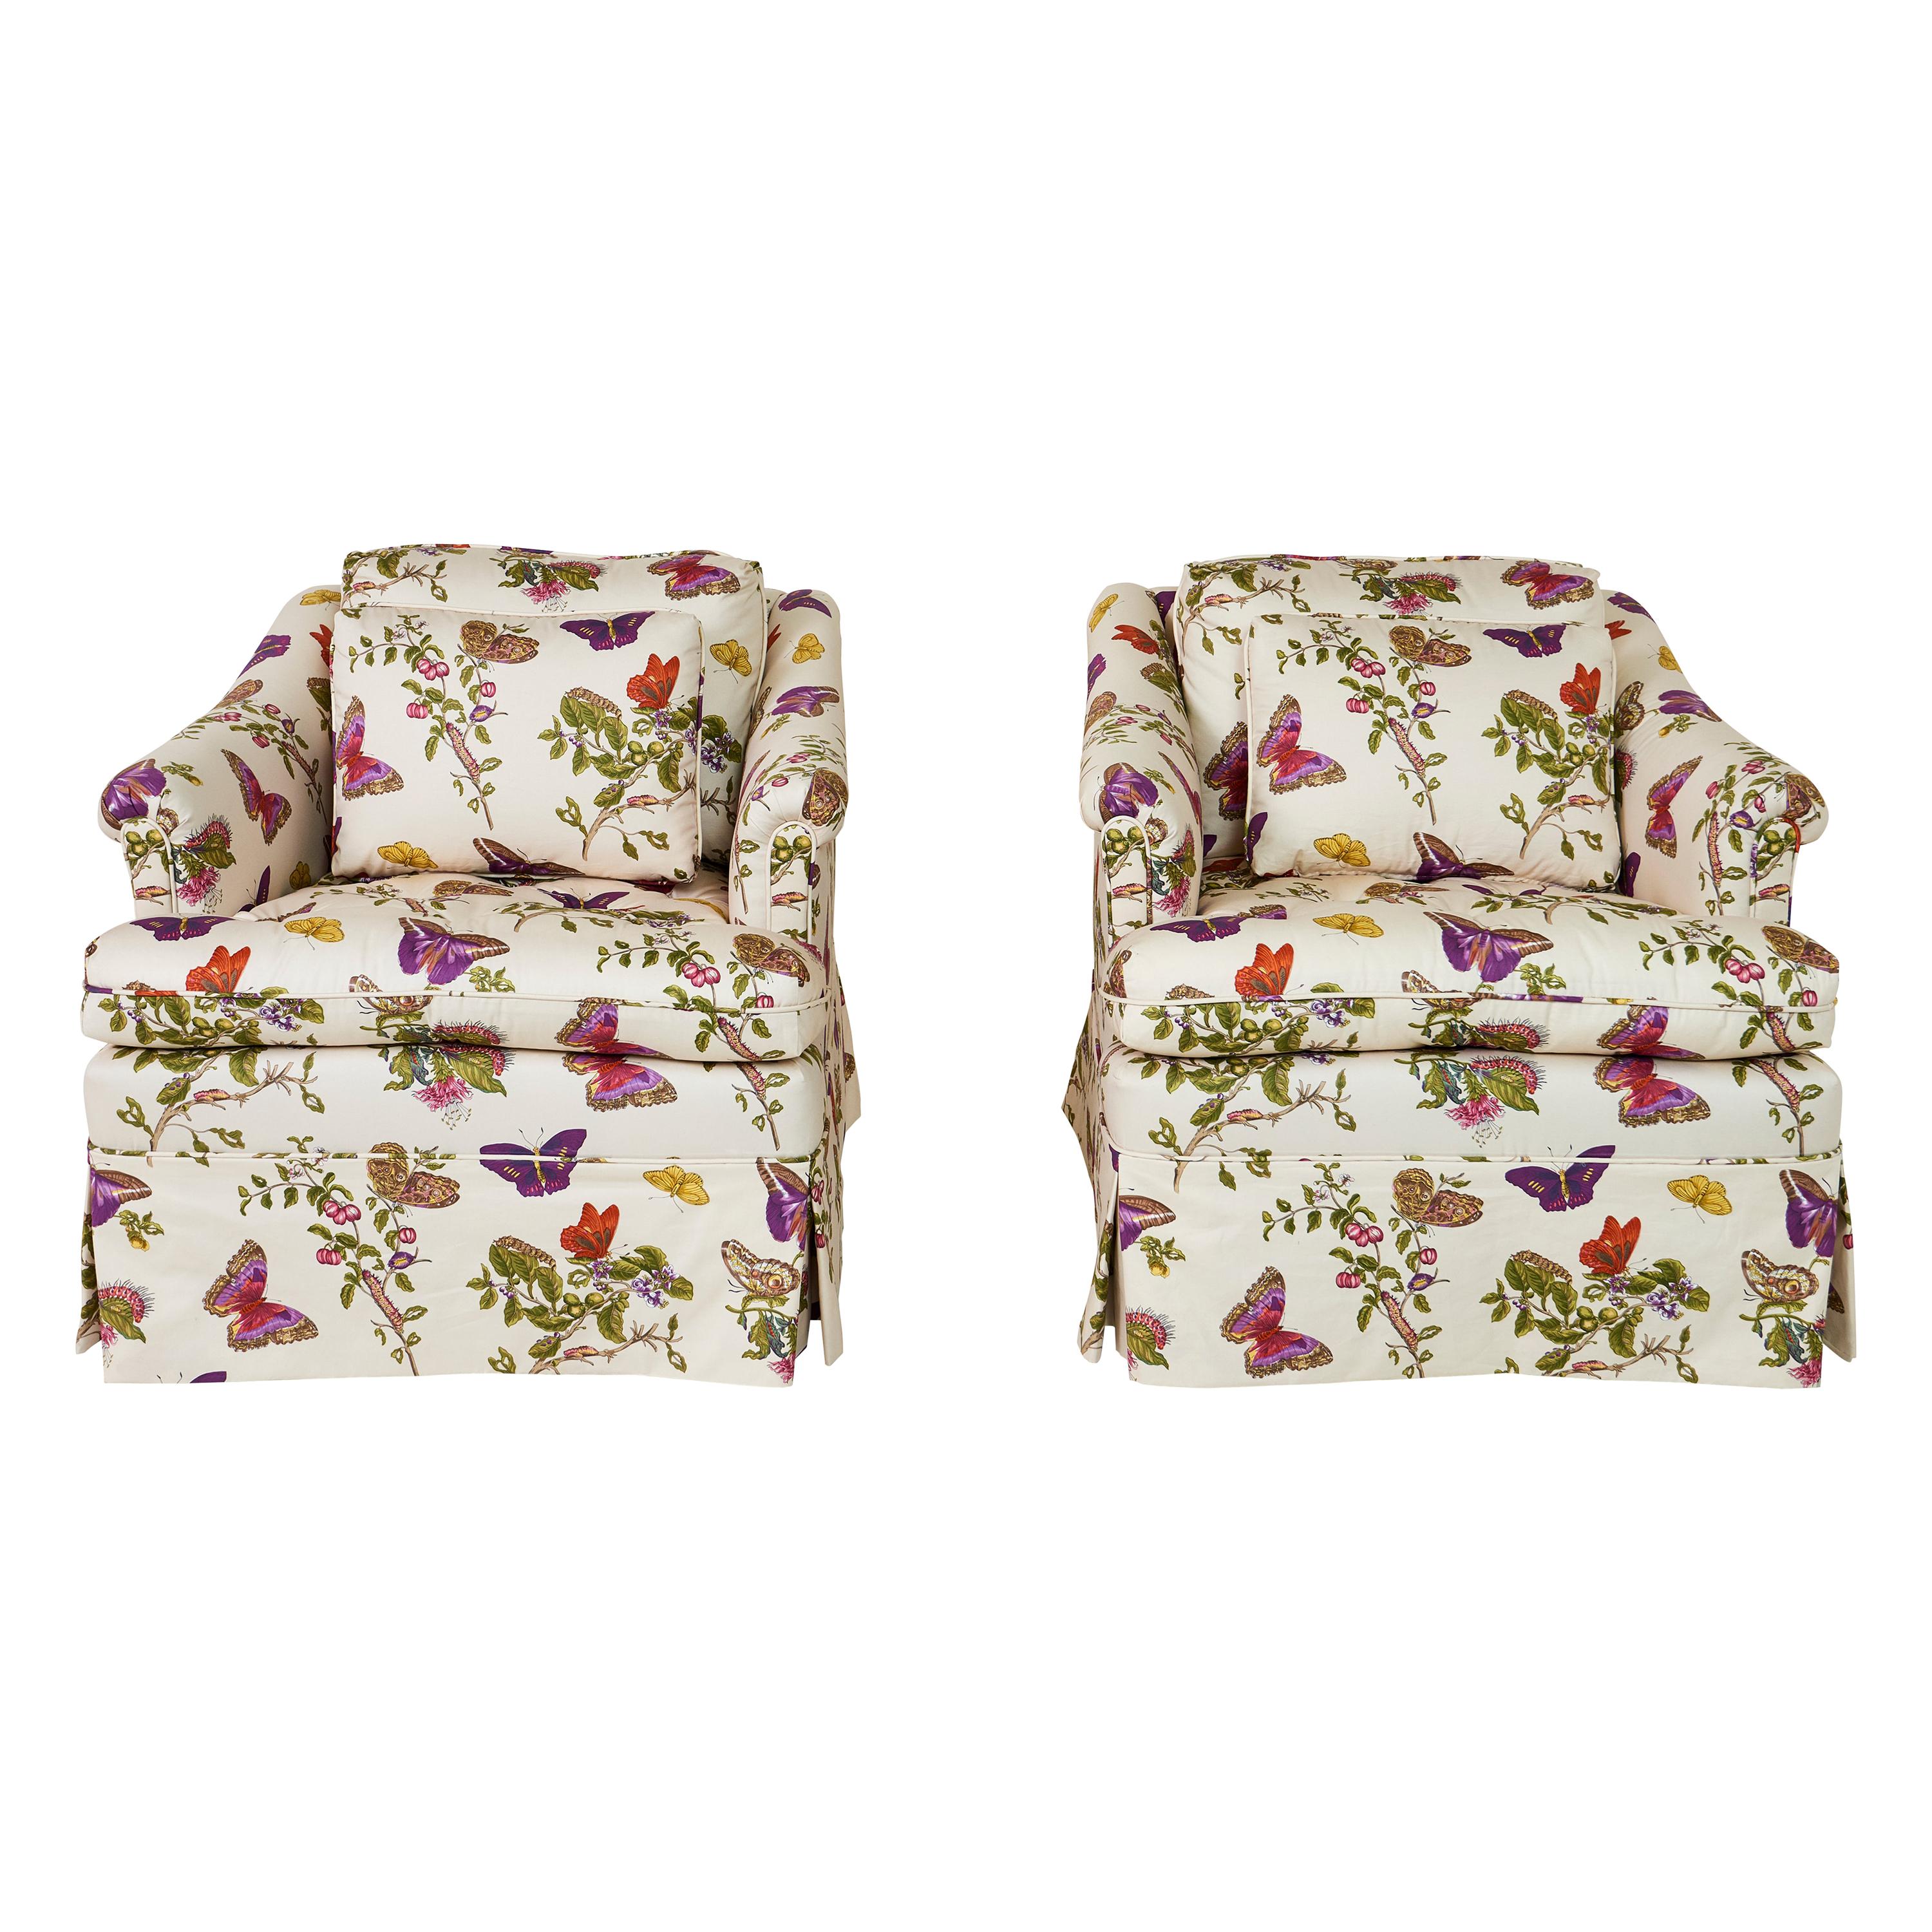 Pair of Midcentury Chairs Upholstered in Schumacher's Baudin Butterfly Chintz